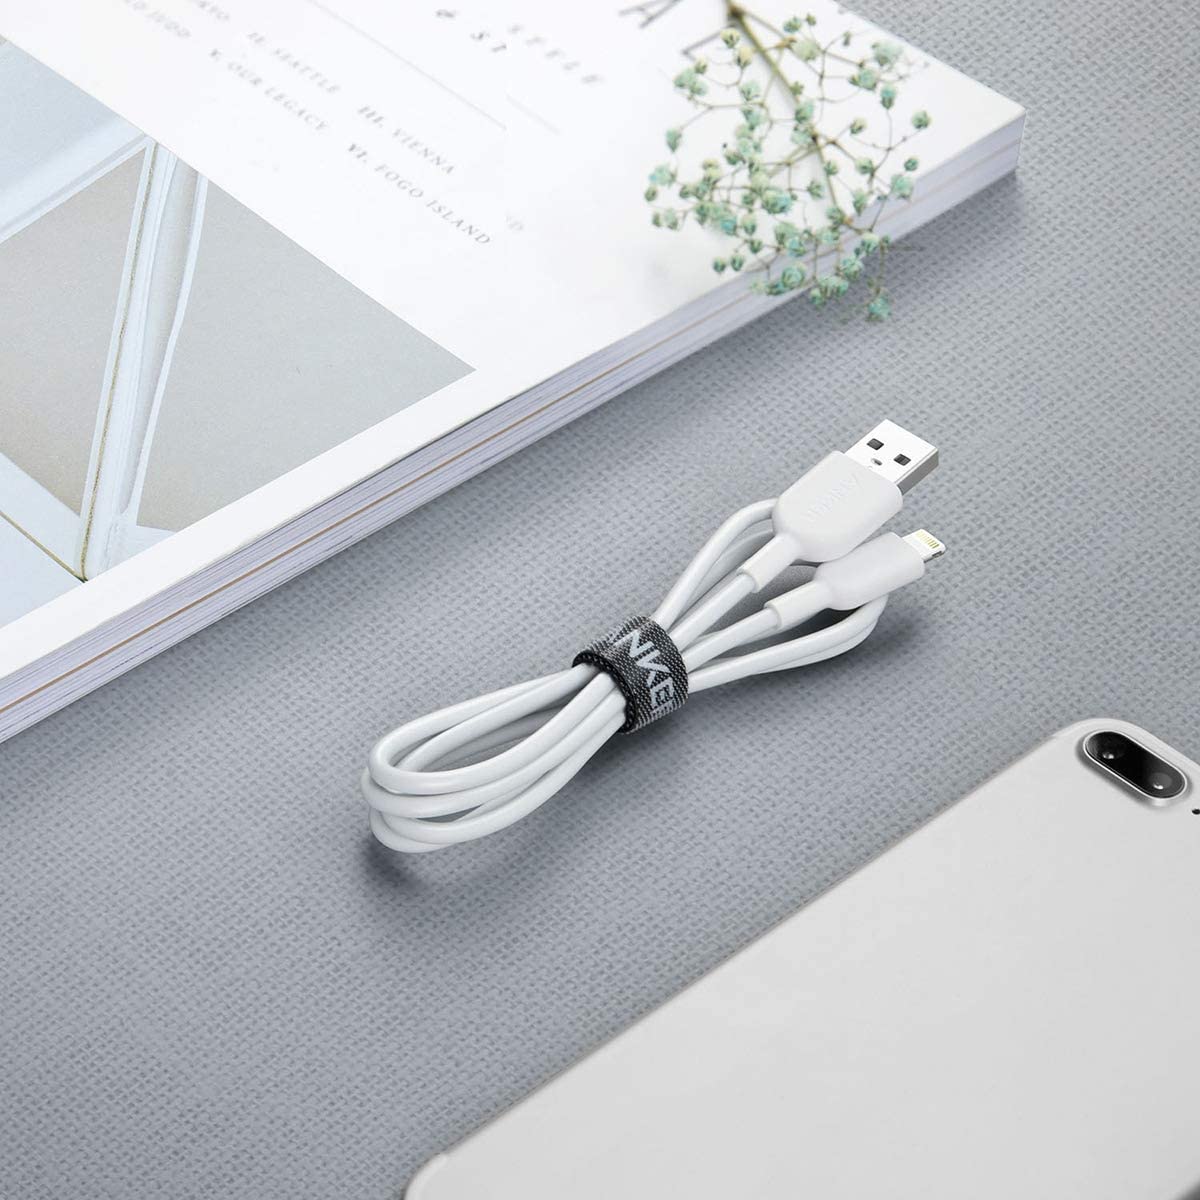 Powerline II Lightning Cable - 3ft